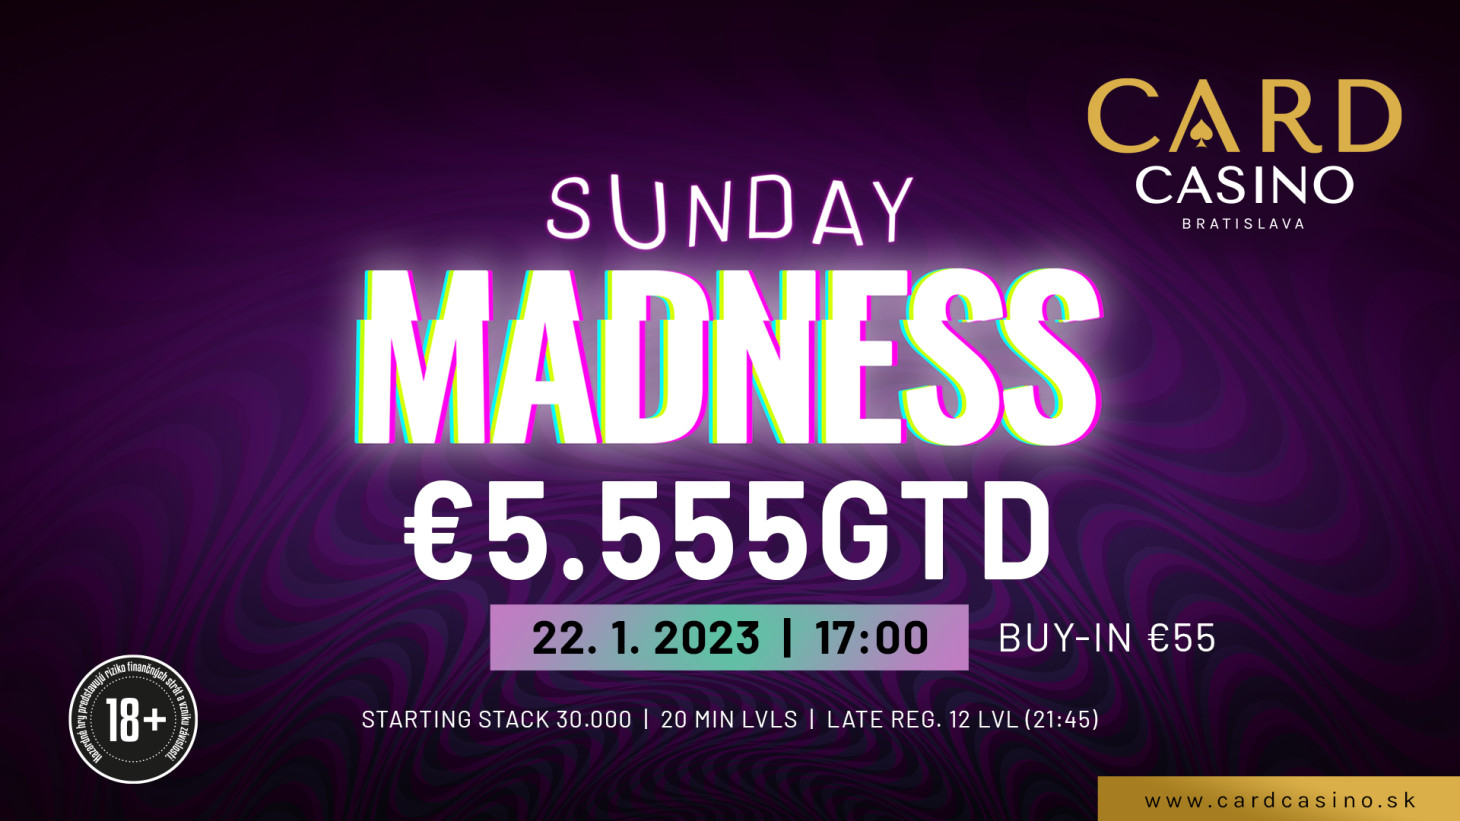 A week of mega single days! Deepstack, Big Stack or Saturday Knockout, €65,000 on the line in Card Casino